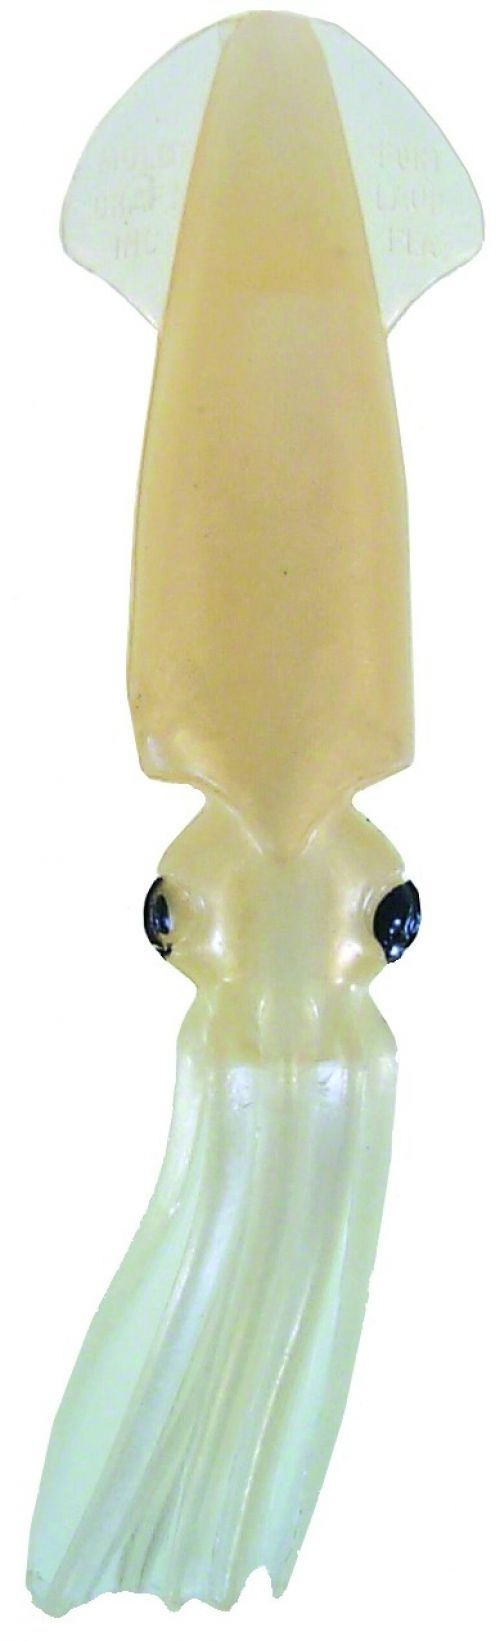 Mold Craft 5006P01 Packaged Squirt